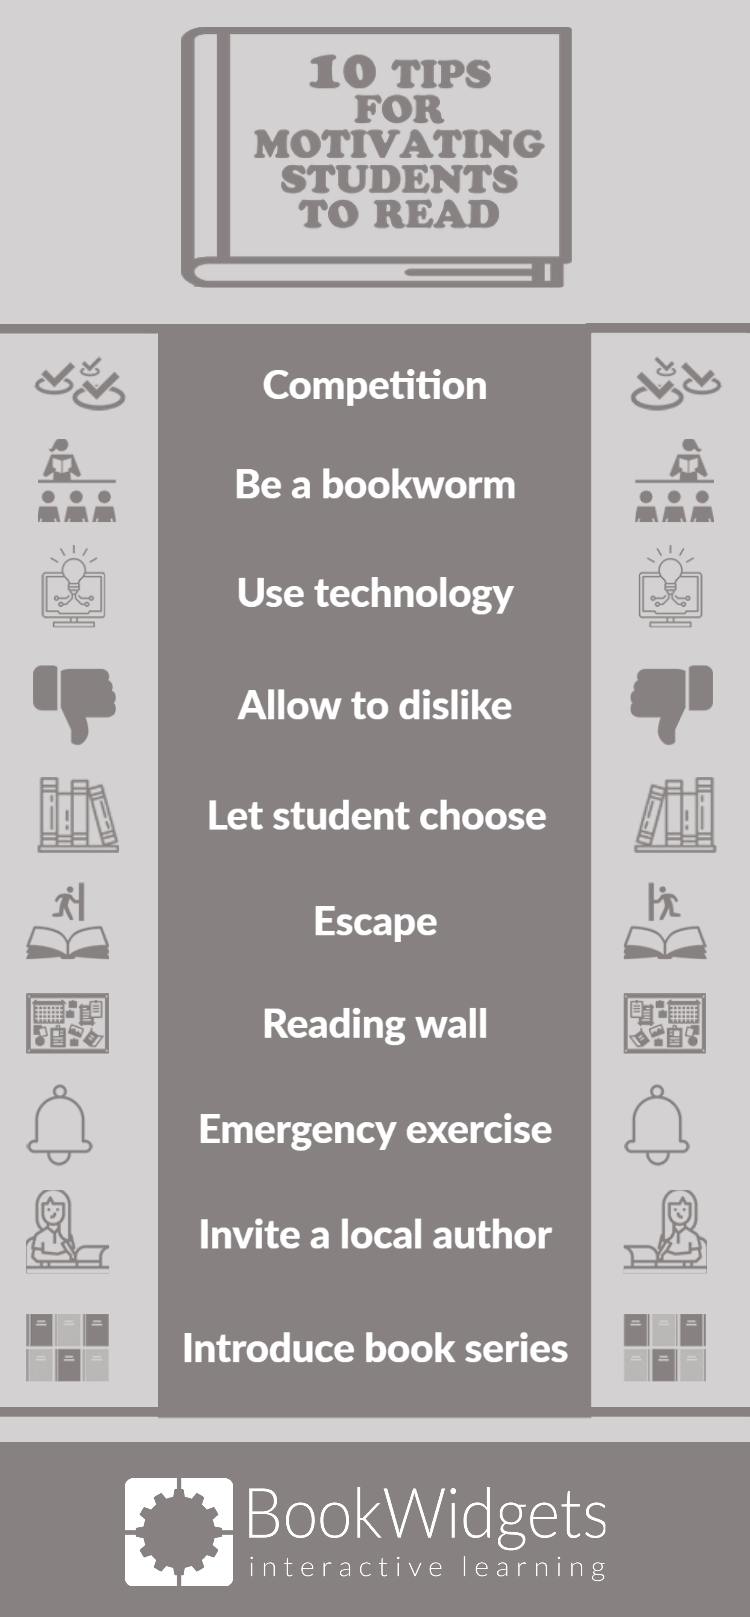 10 tips for motivating students to read